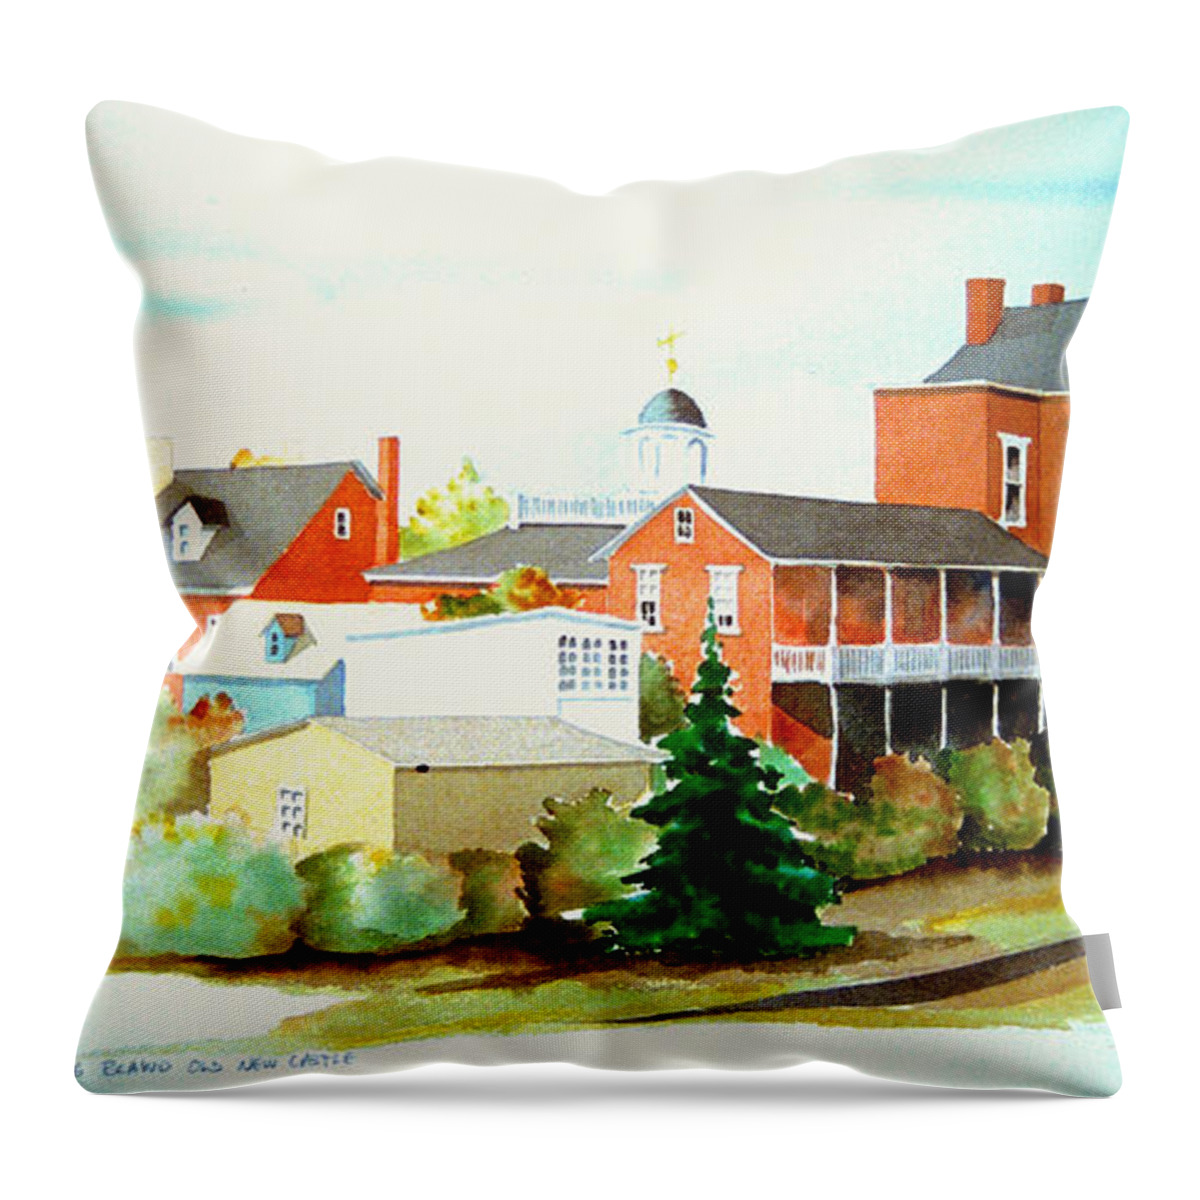 Watercolor Throw Pillow featuring the painting Behind Old New Castle by William Renzulli